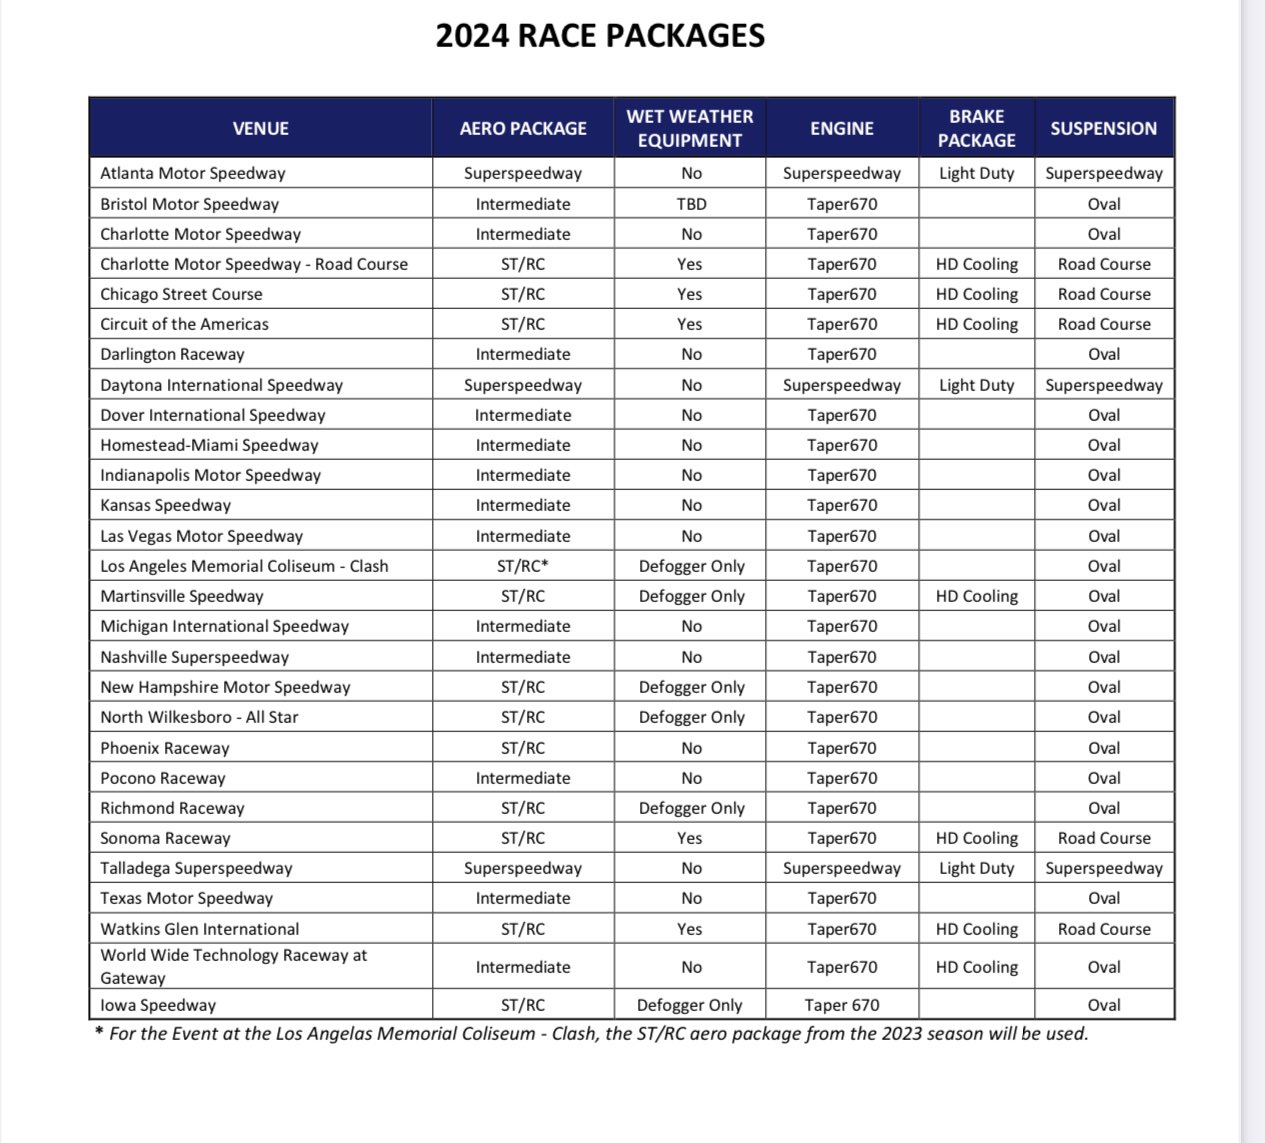 NASCAR 2024 Race Packages